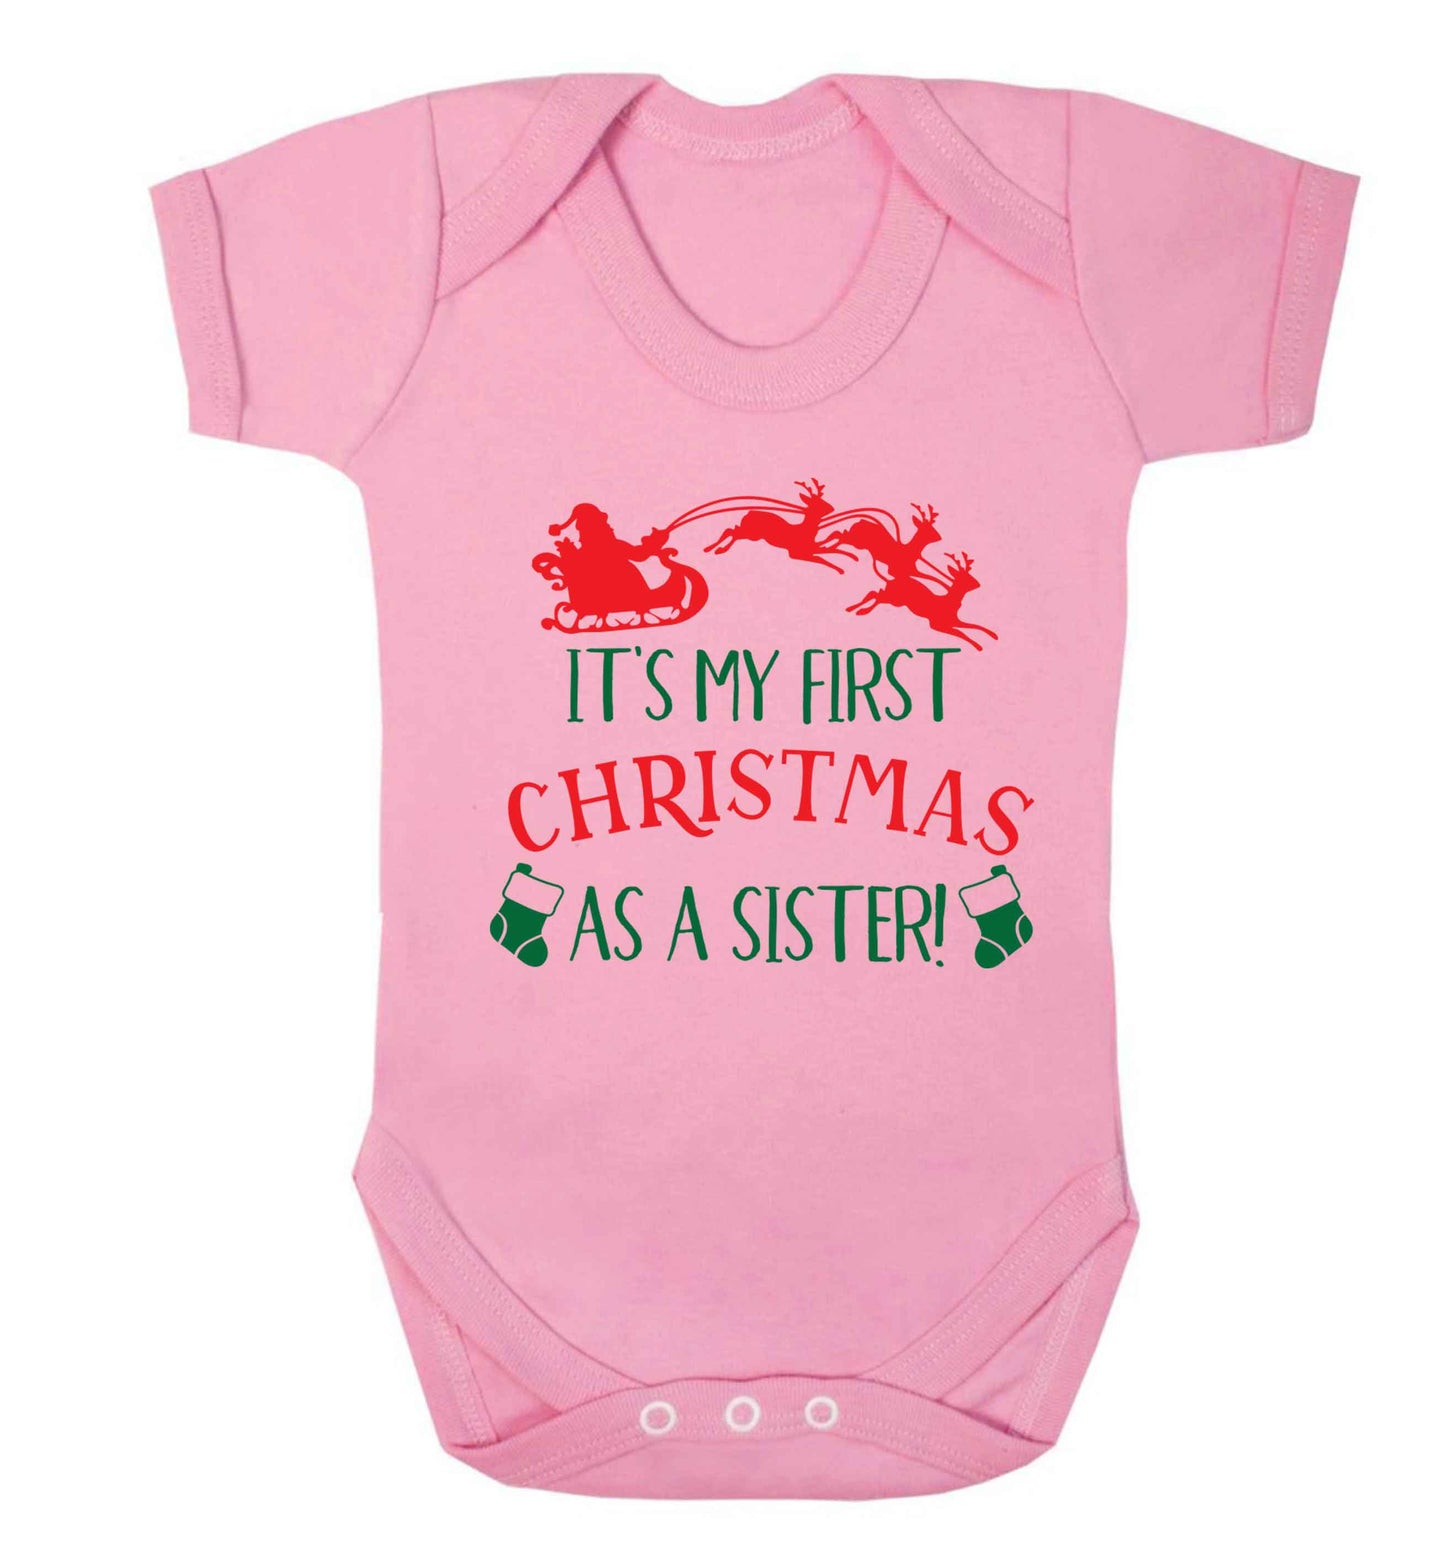 It's my first Christmas as a sister! Baby Vest pale pink 18-24 months